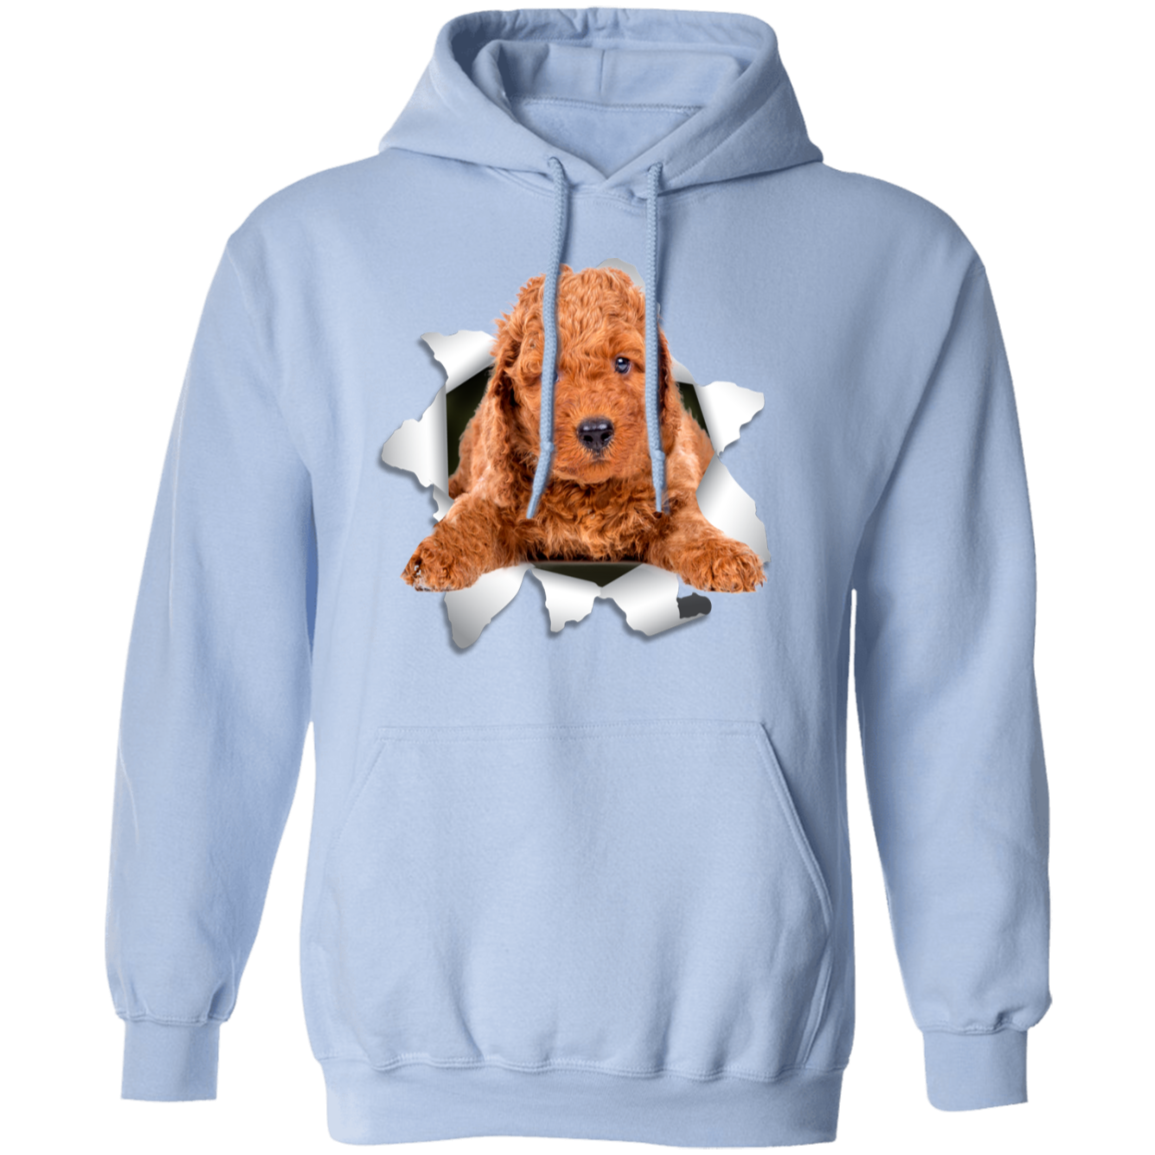 Canine's World Sweatshirts POODLE 3D Pullover Hoodie 8 oz. Ultimate Shield